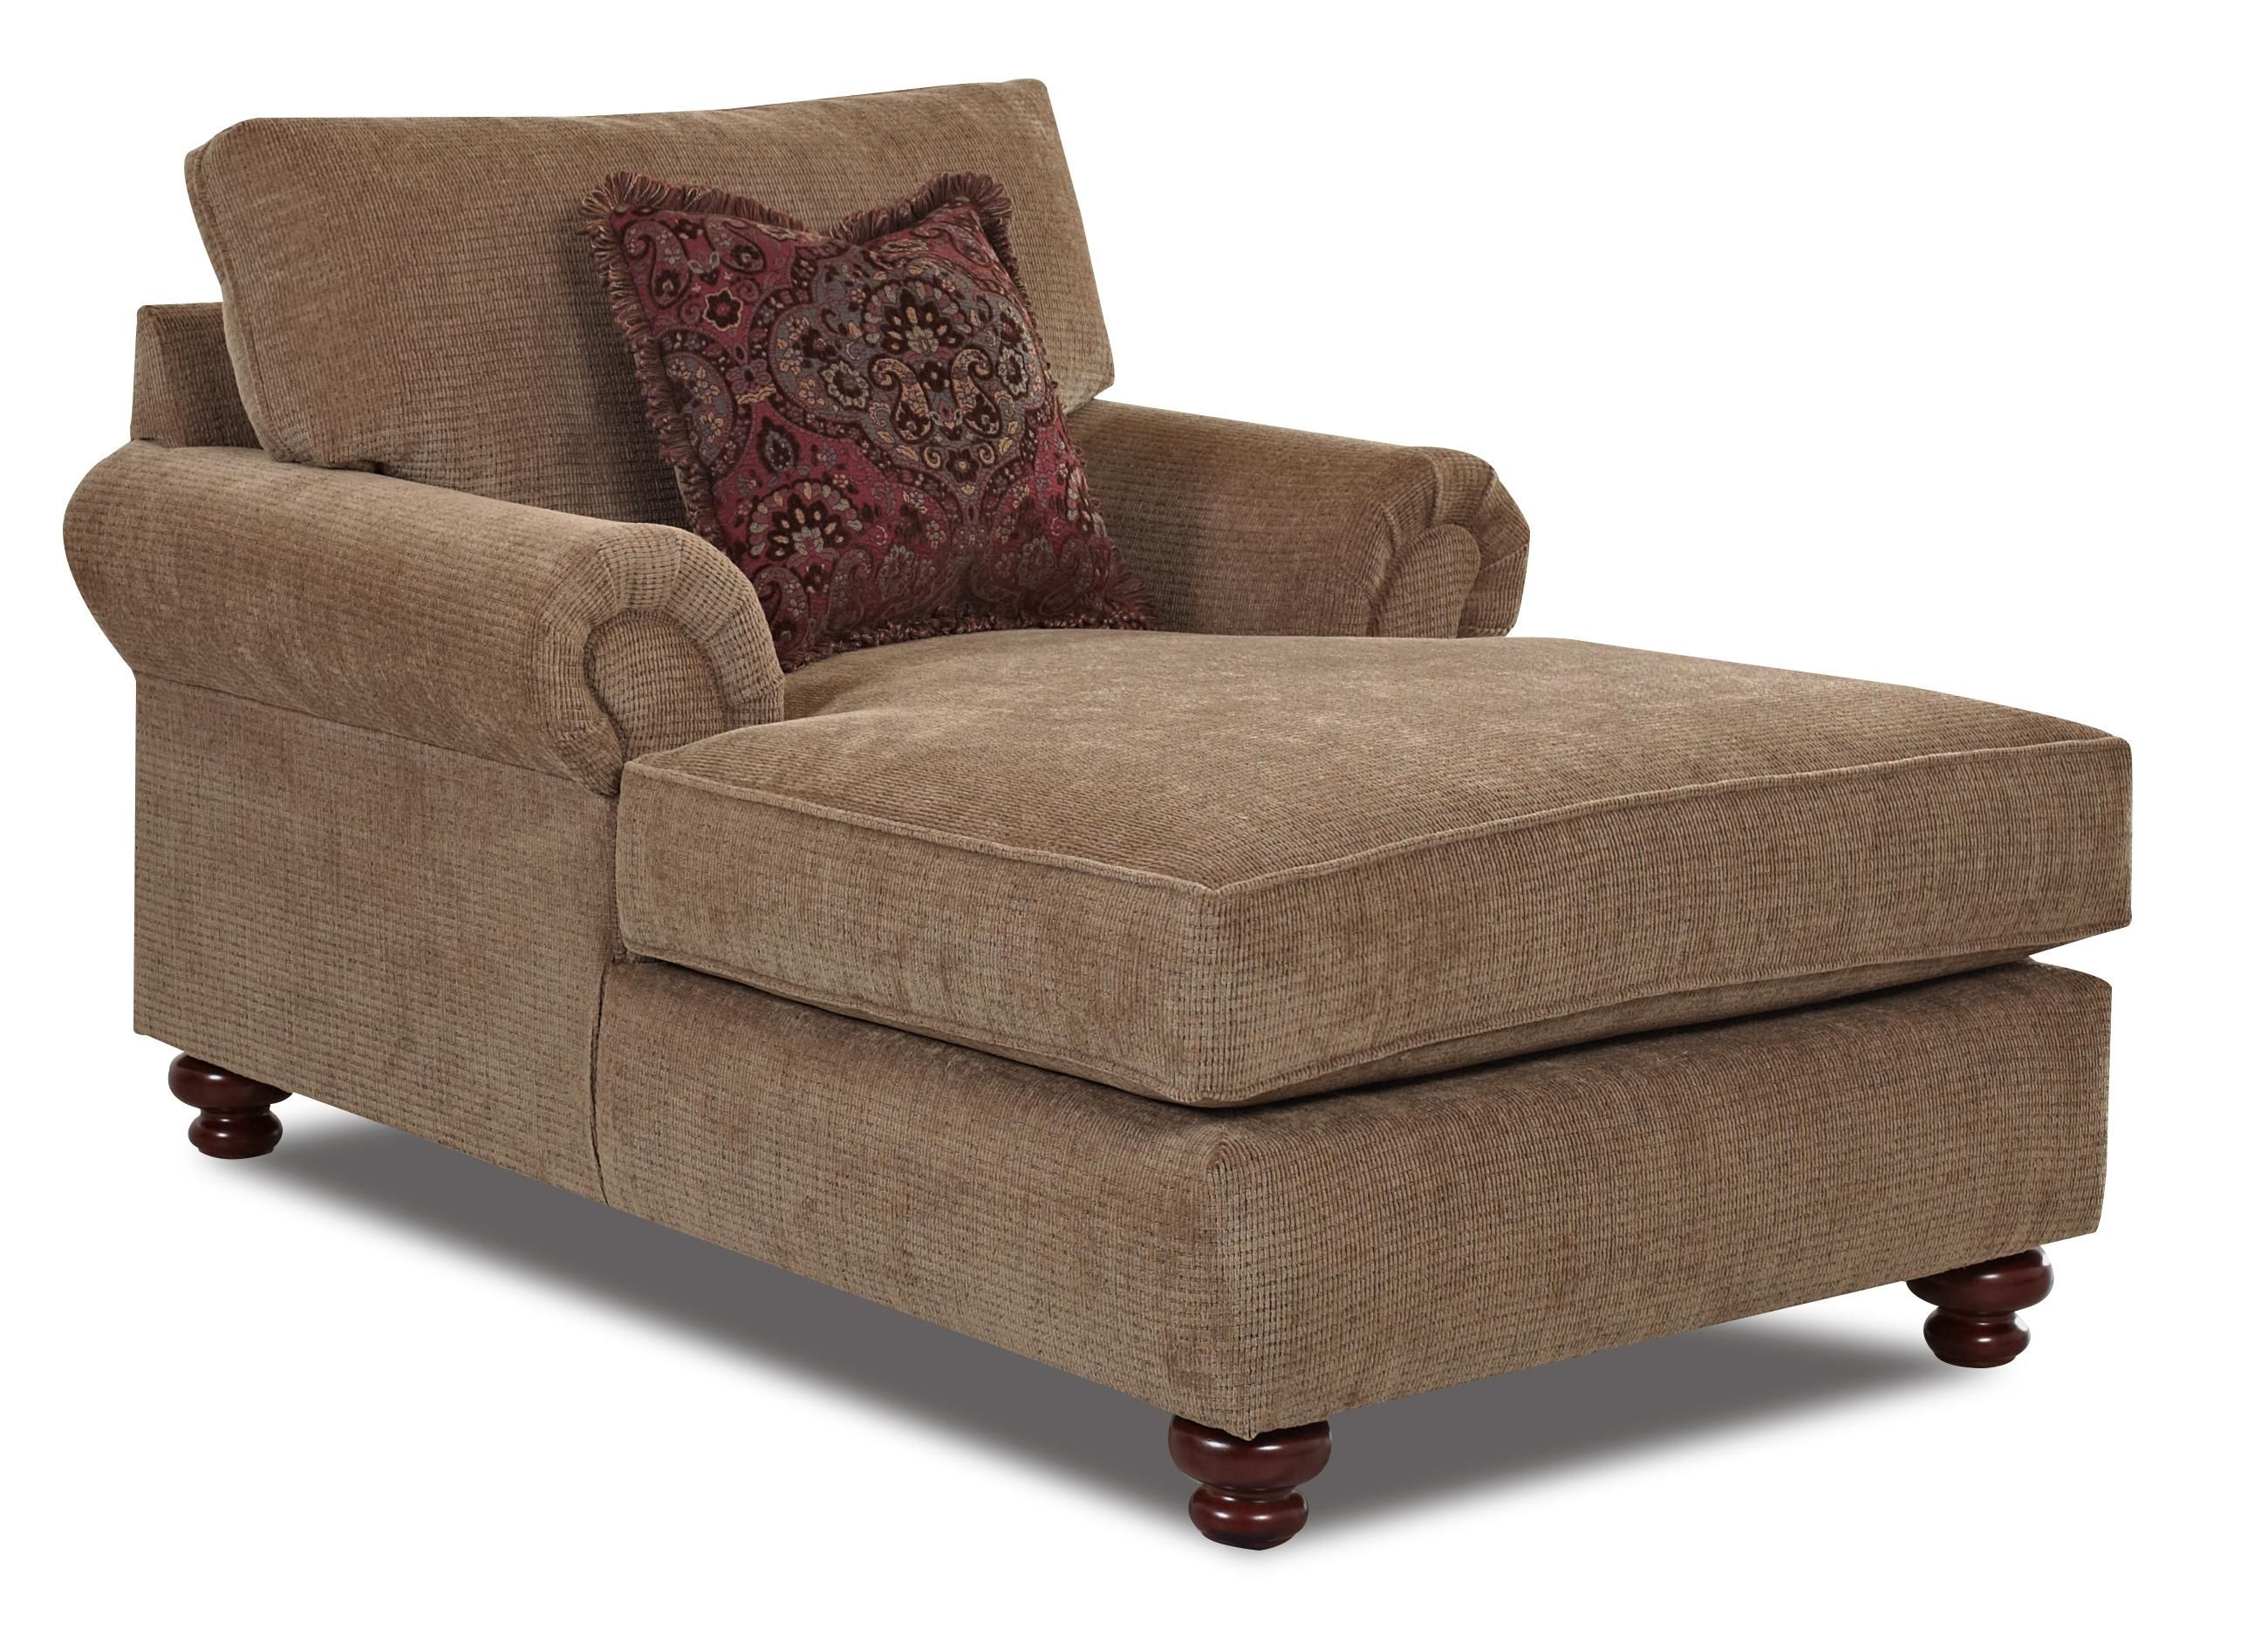 Greenvale Traditional Chaise Lounge Klaussner Wolf Furniture With Lounge Sofas And Chairs (View 10 of 15)